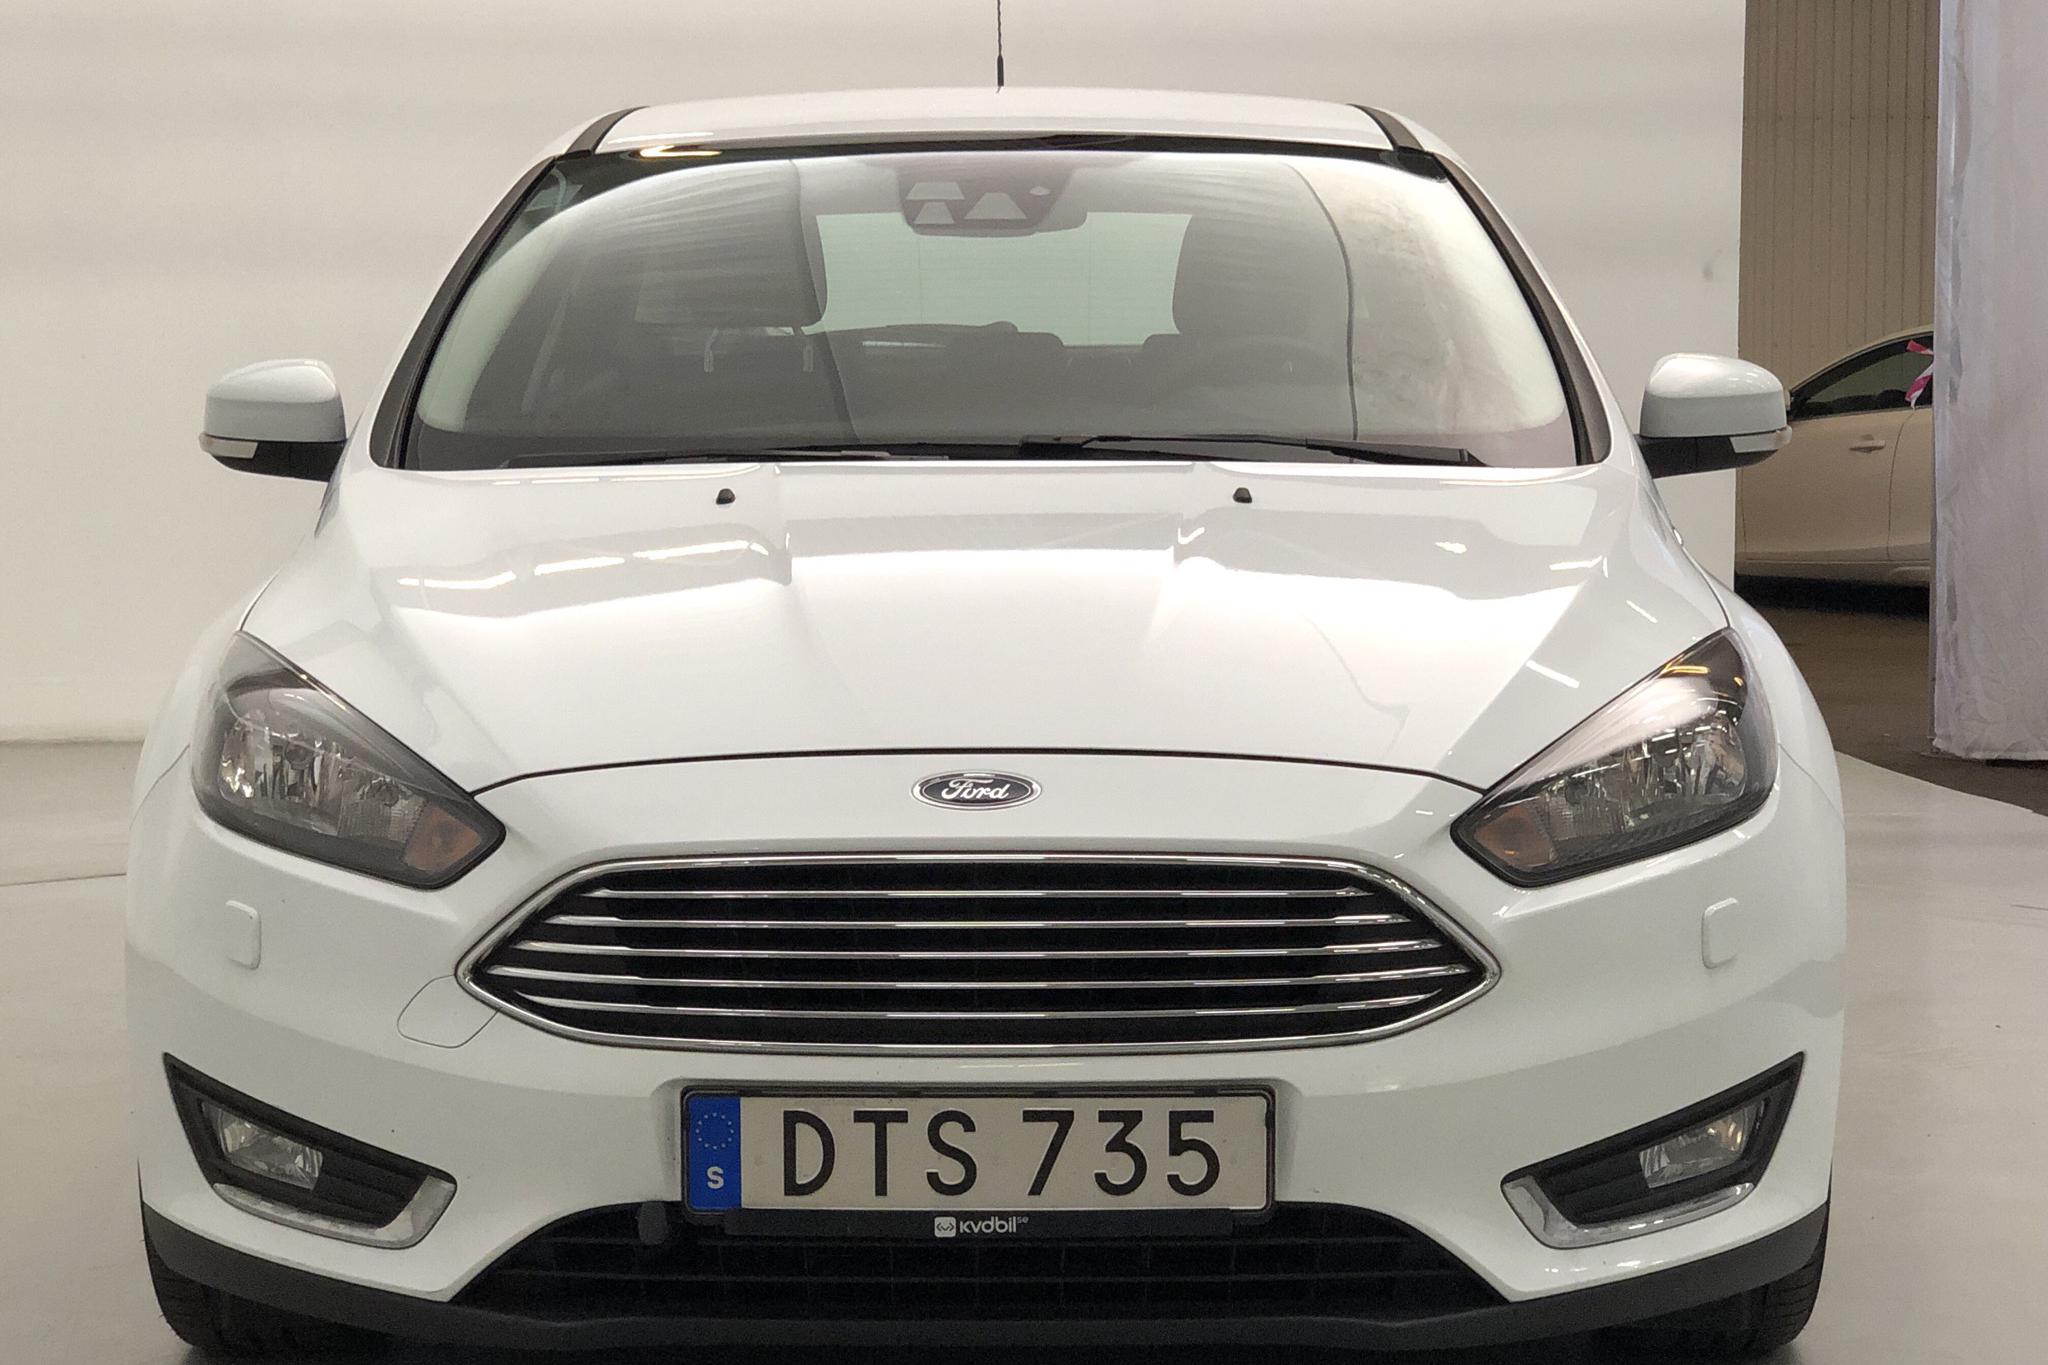 Ford Focus 1.5 TDCi ECOnetic 5dr (105hk) - 52 260 km - Manual - white - 2017